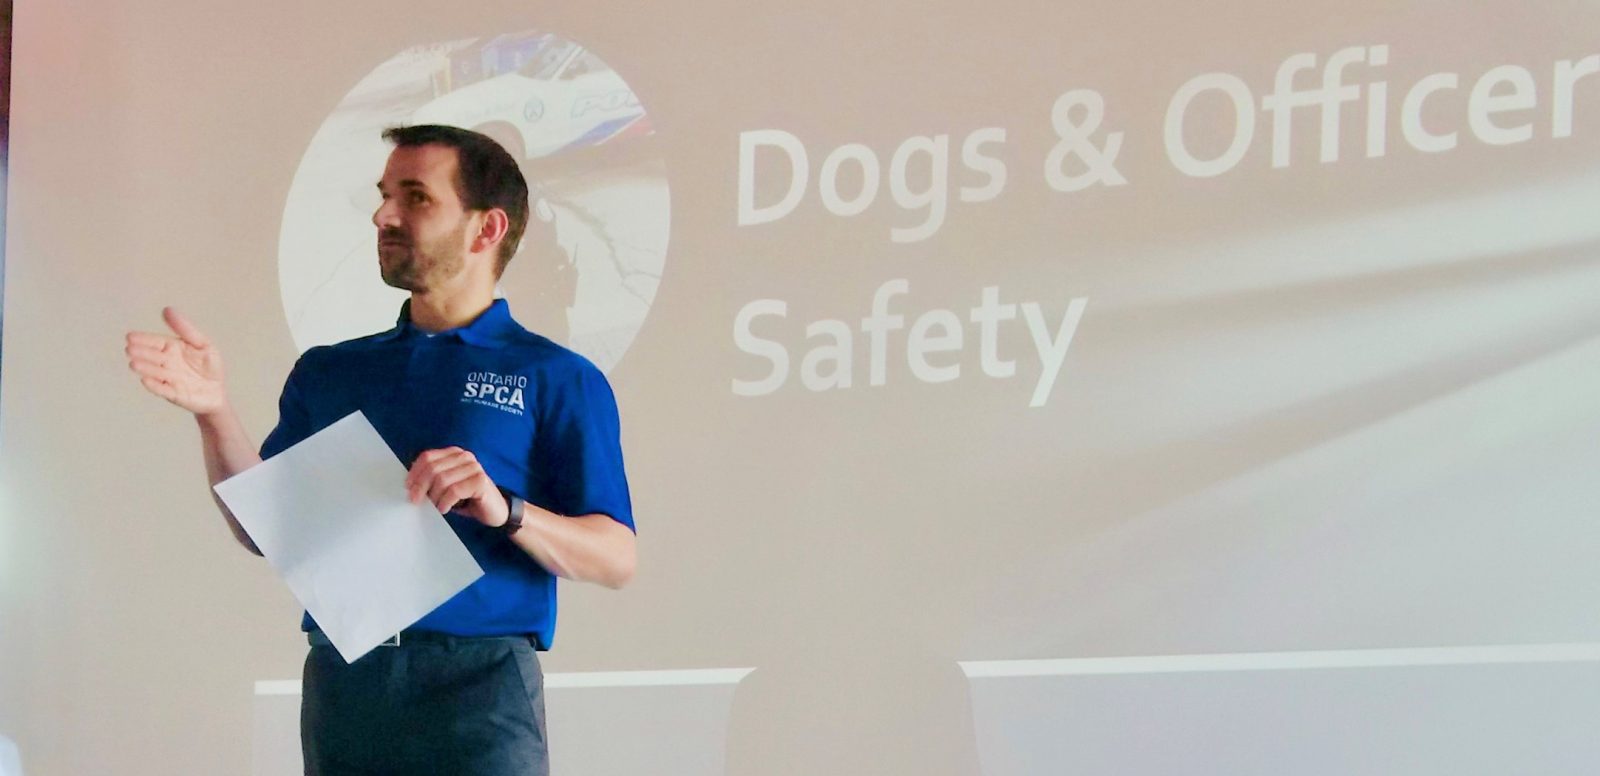 CPS completes training with OSPCA to better protect animals